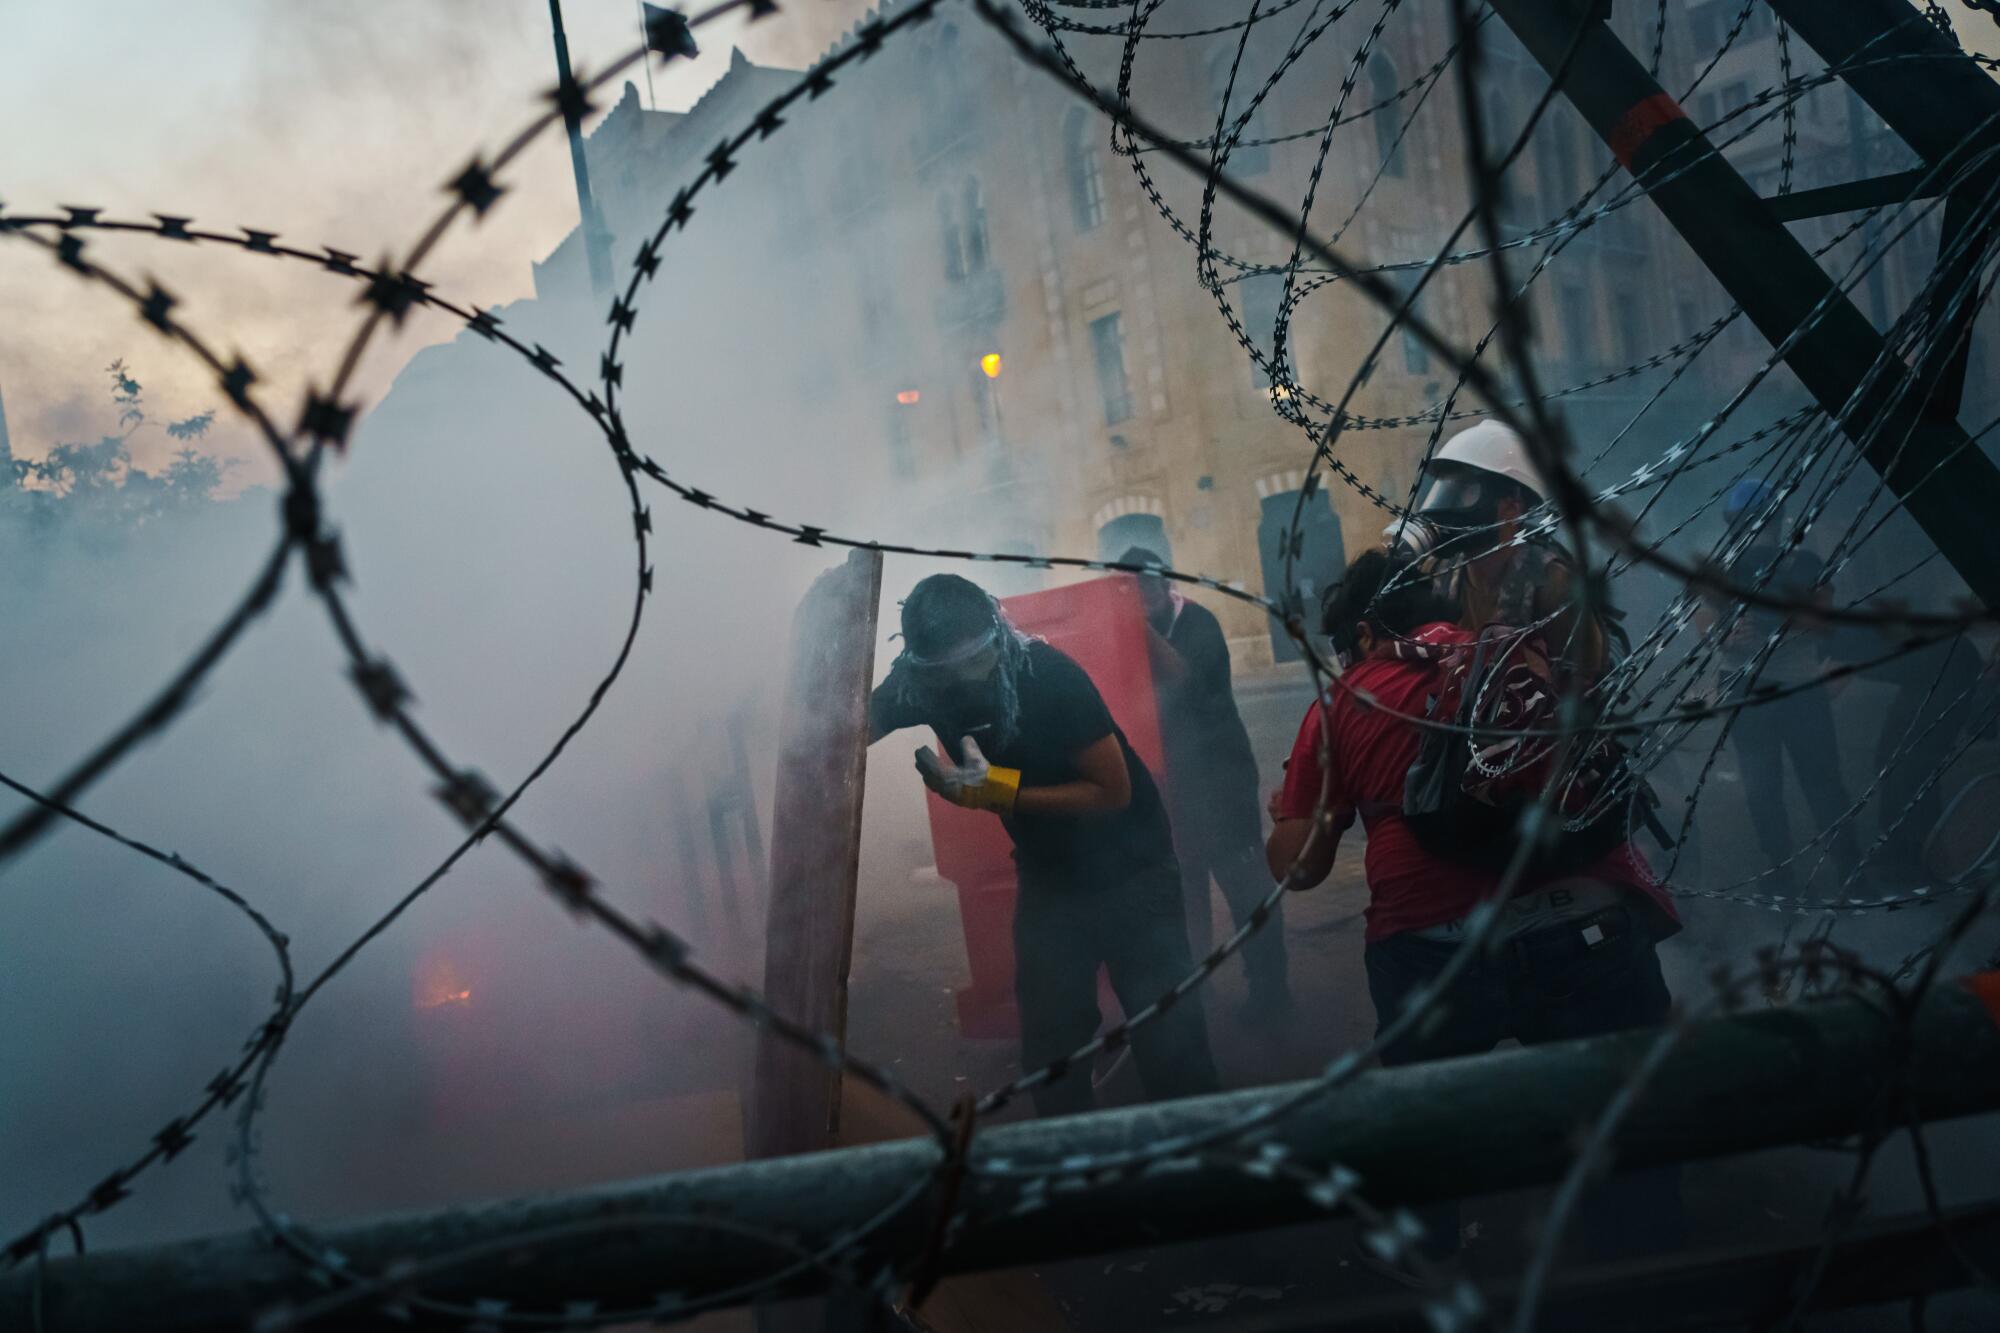 Seen through barbed wire, people, some wearing gas masks, stand amid a haze on a city street.